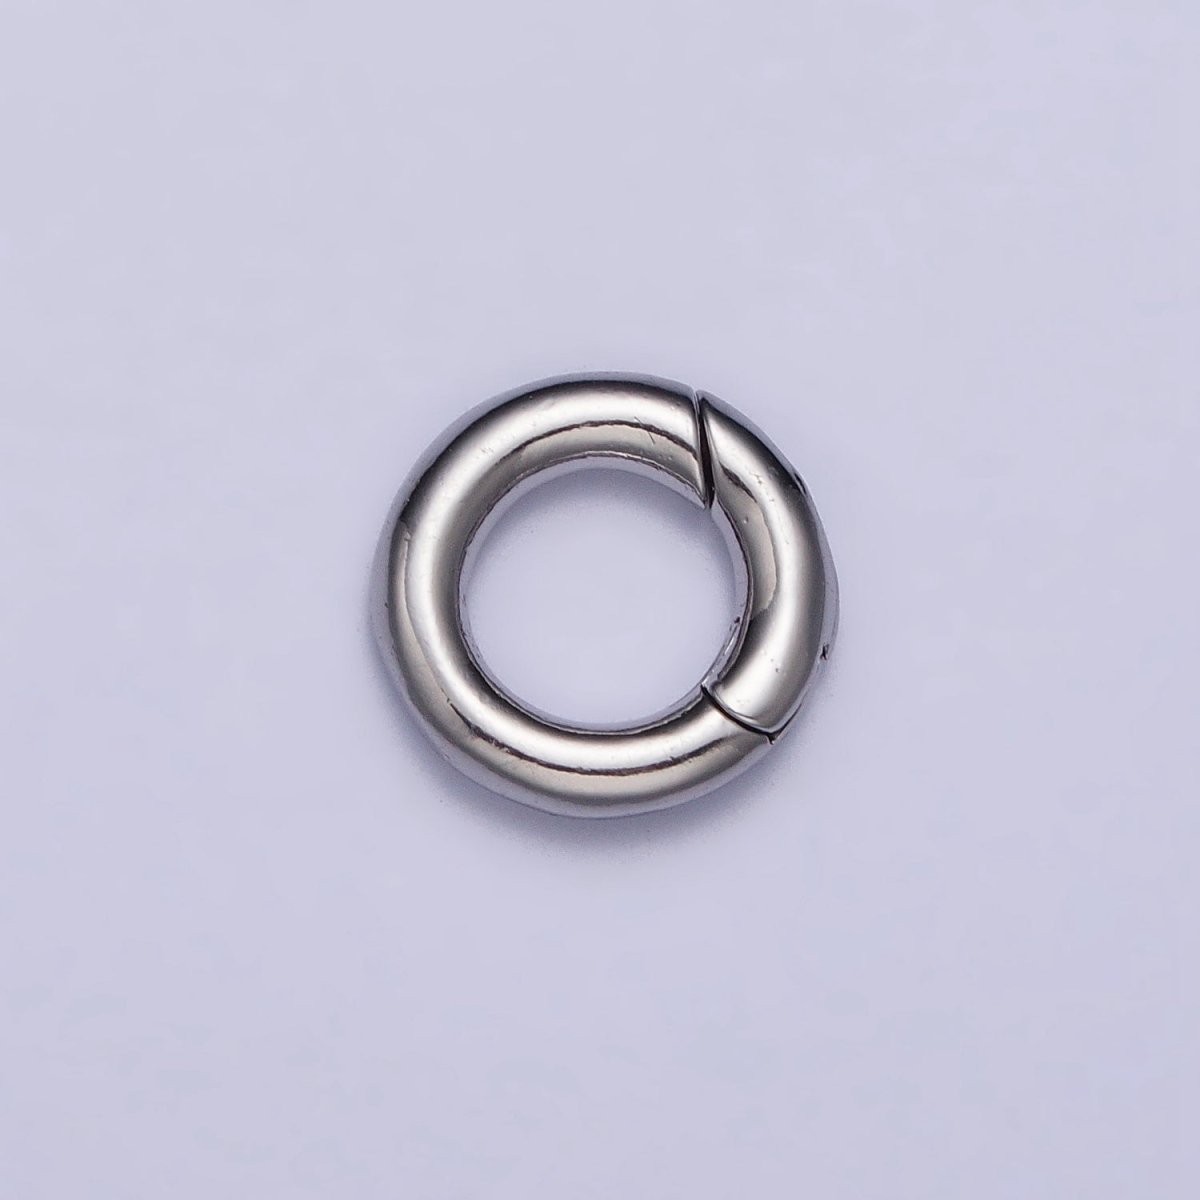 Dainty Gold Silver Spring Gate Ring 10mm, 15mm Round Circle Ring, Round Clasp, Push Clip Clasp, Spring Gate for Jewelry Making Z-340 Z-341 Z-352 Z-353 - DLUXCA